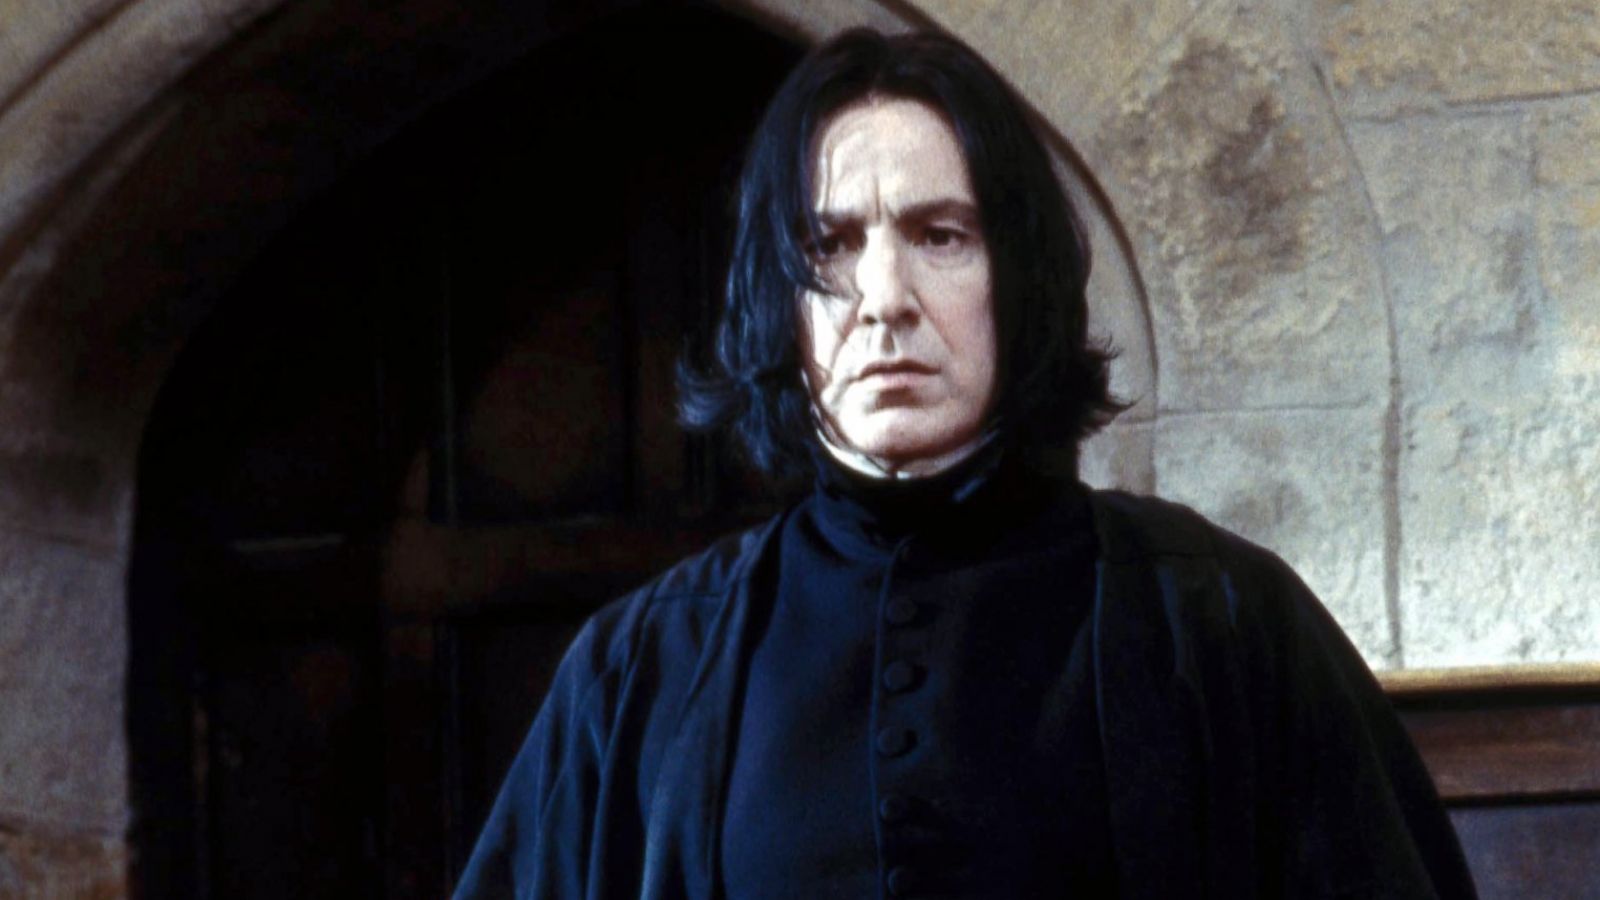 Alan Rickman, villain in 'Harry Potter' and star of stage, dies at